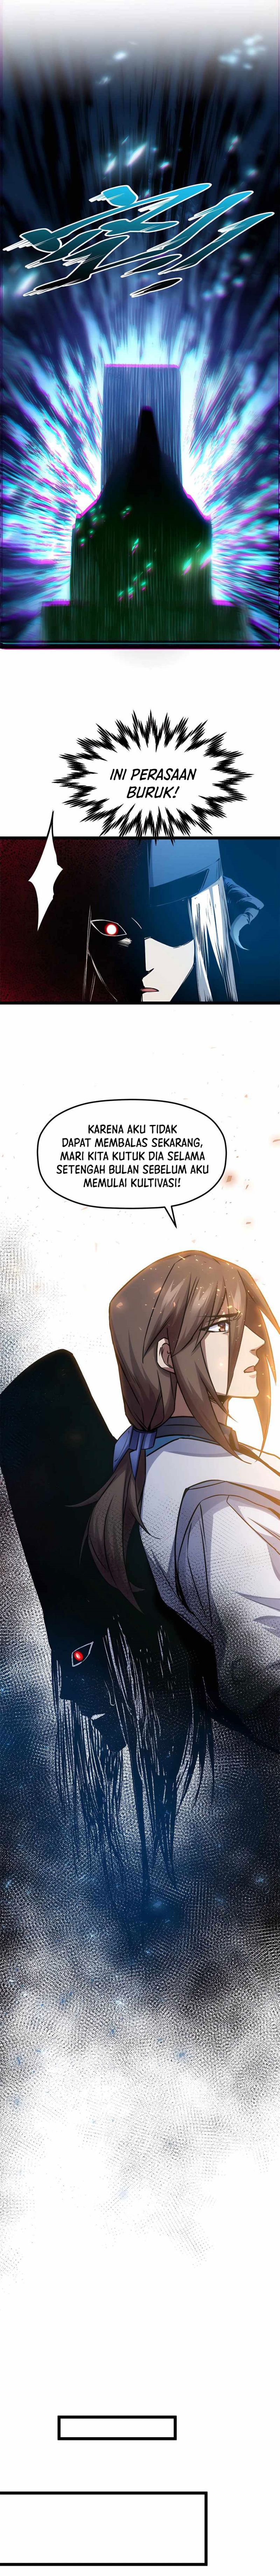 Dilarang COPAS - situs resmi www.mangacanblog.com - Komik top tier providence secretly cultivate for a thousand years 122 - chapter 122 123 Indonesia top tier providence secretly cultivate for a thousand years 122 - chapter 122 Terbaru 14|Baca Manga Komik Indonesia|Mangacan